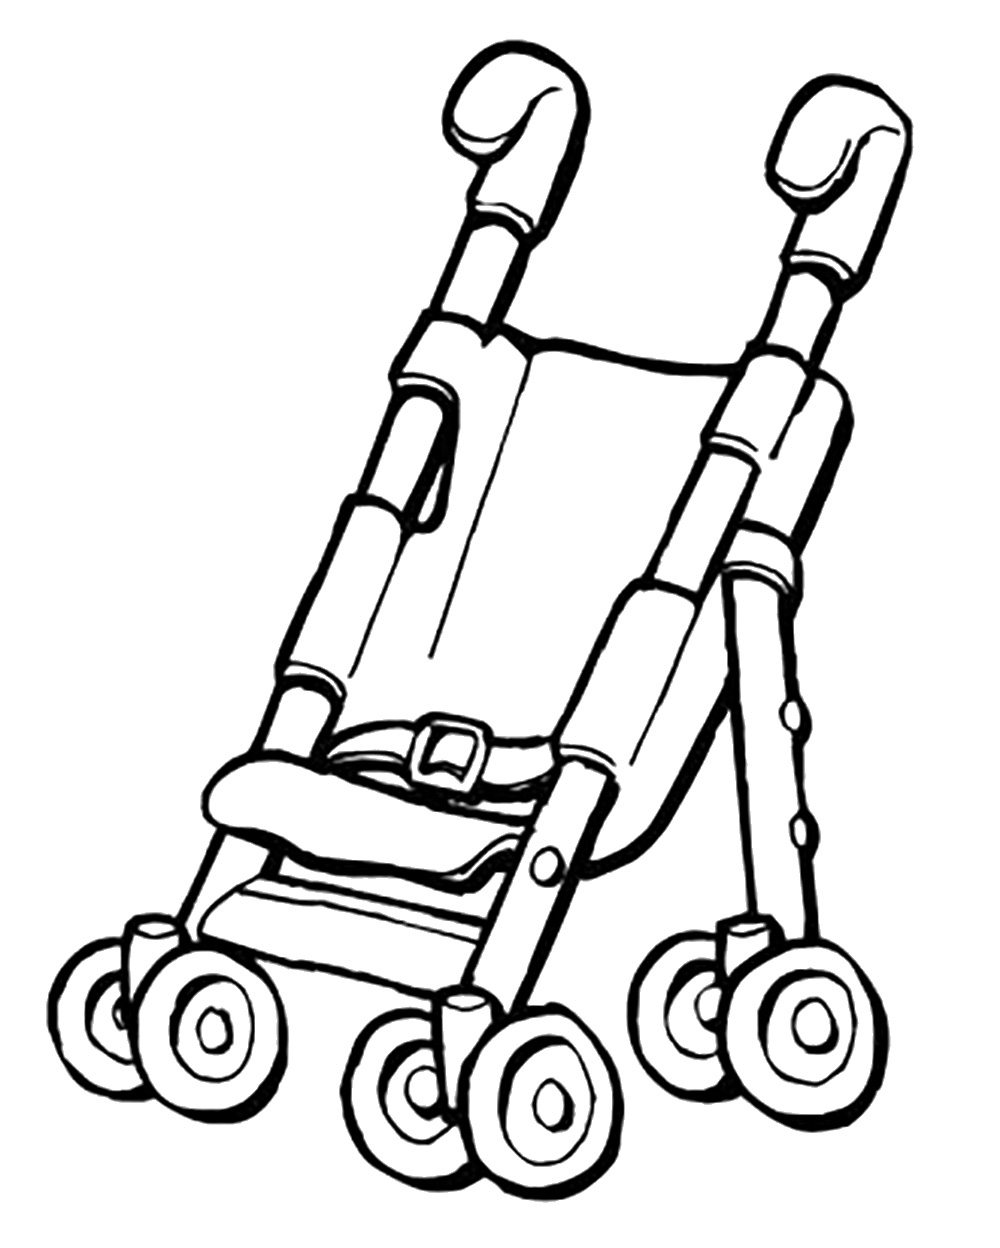 Stroller Coloring Pages to download and print for free